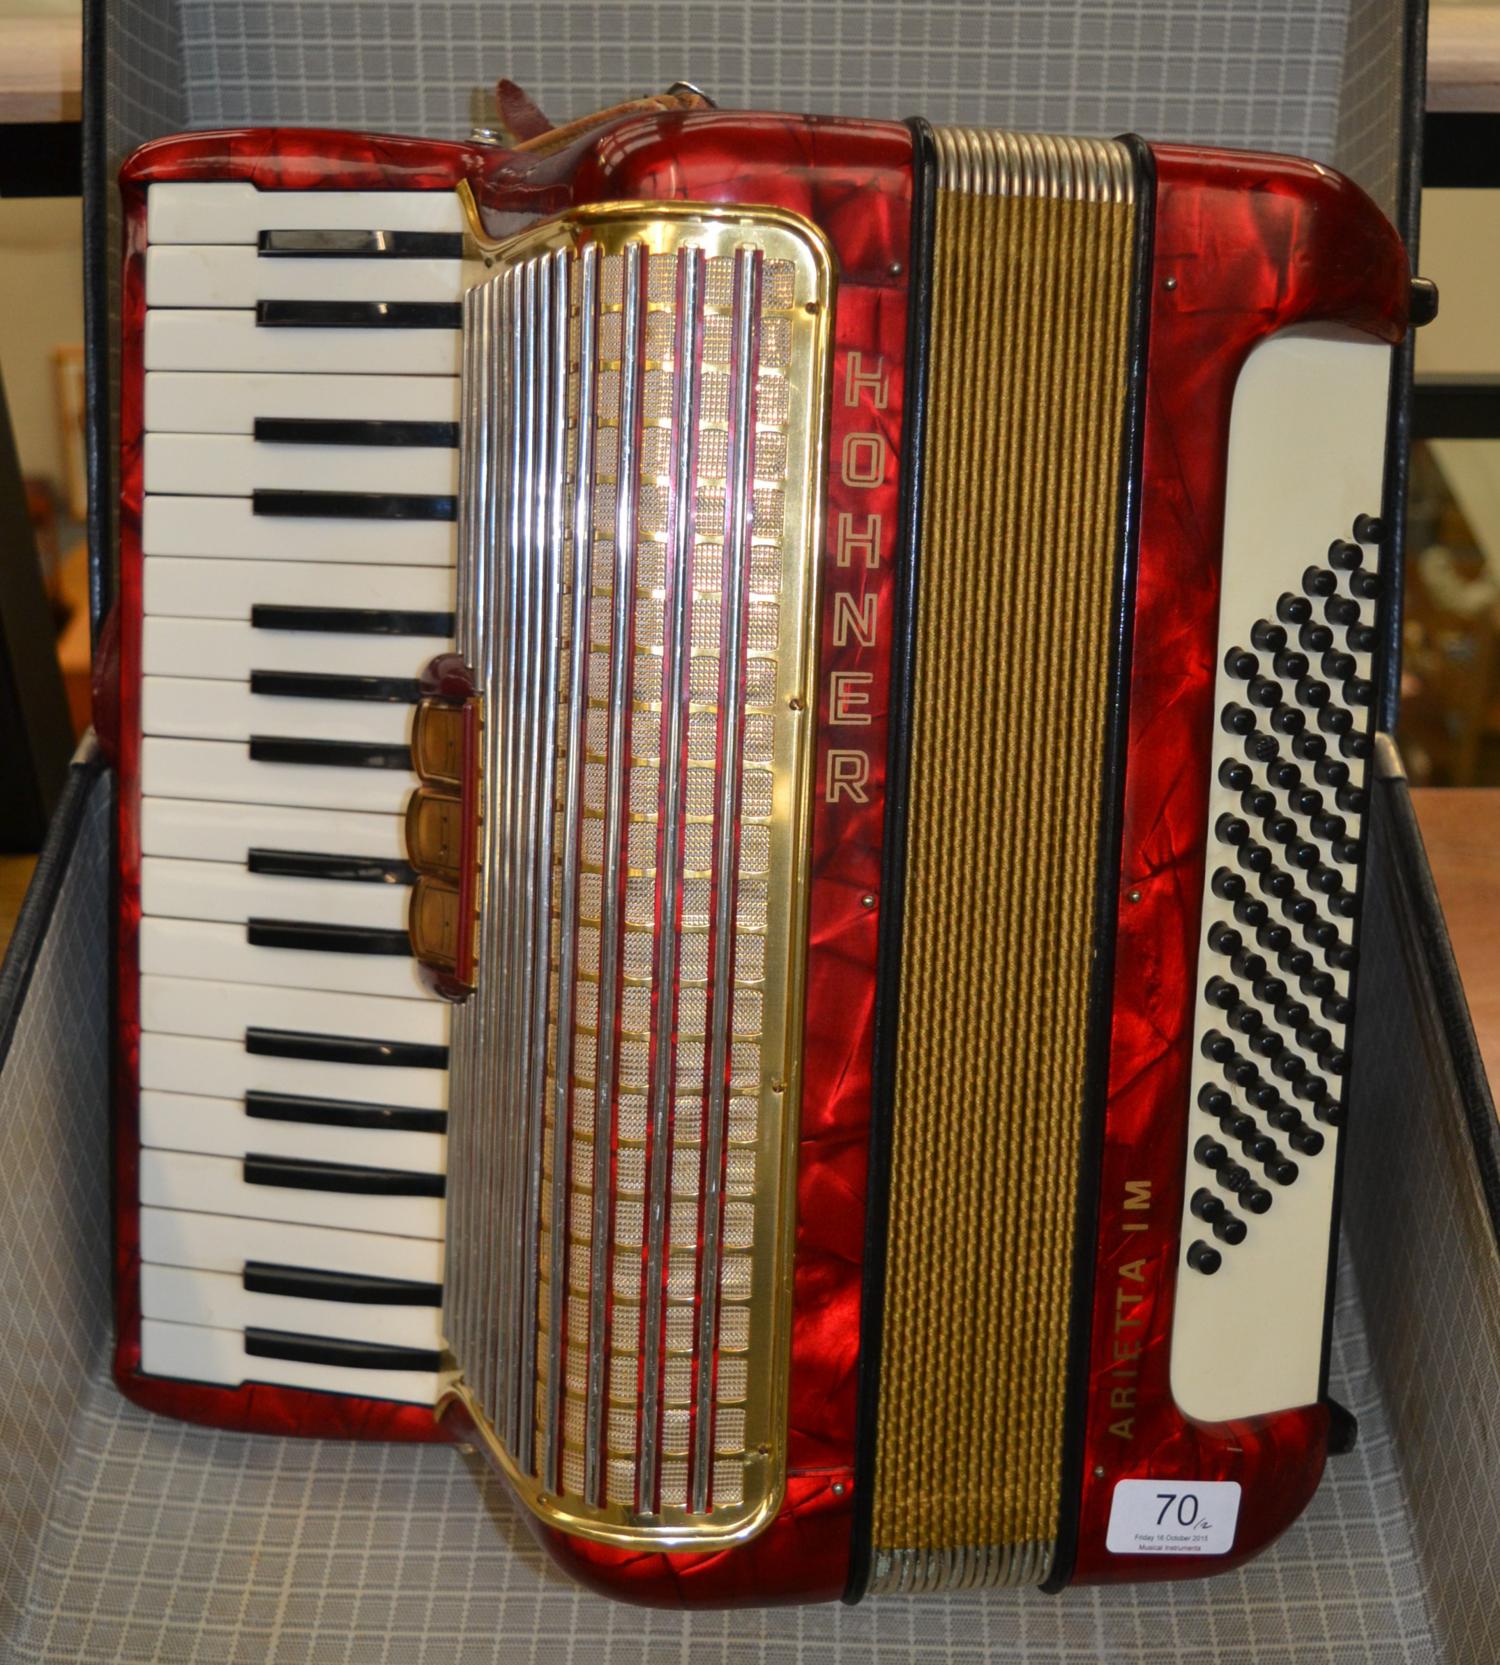 Hohner Accordion Serial Numbers